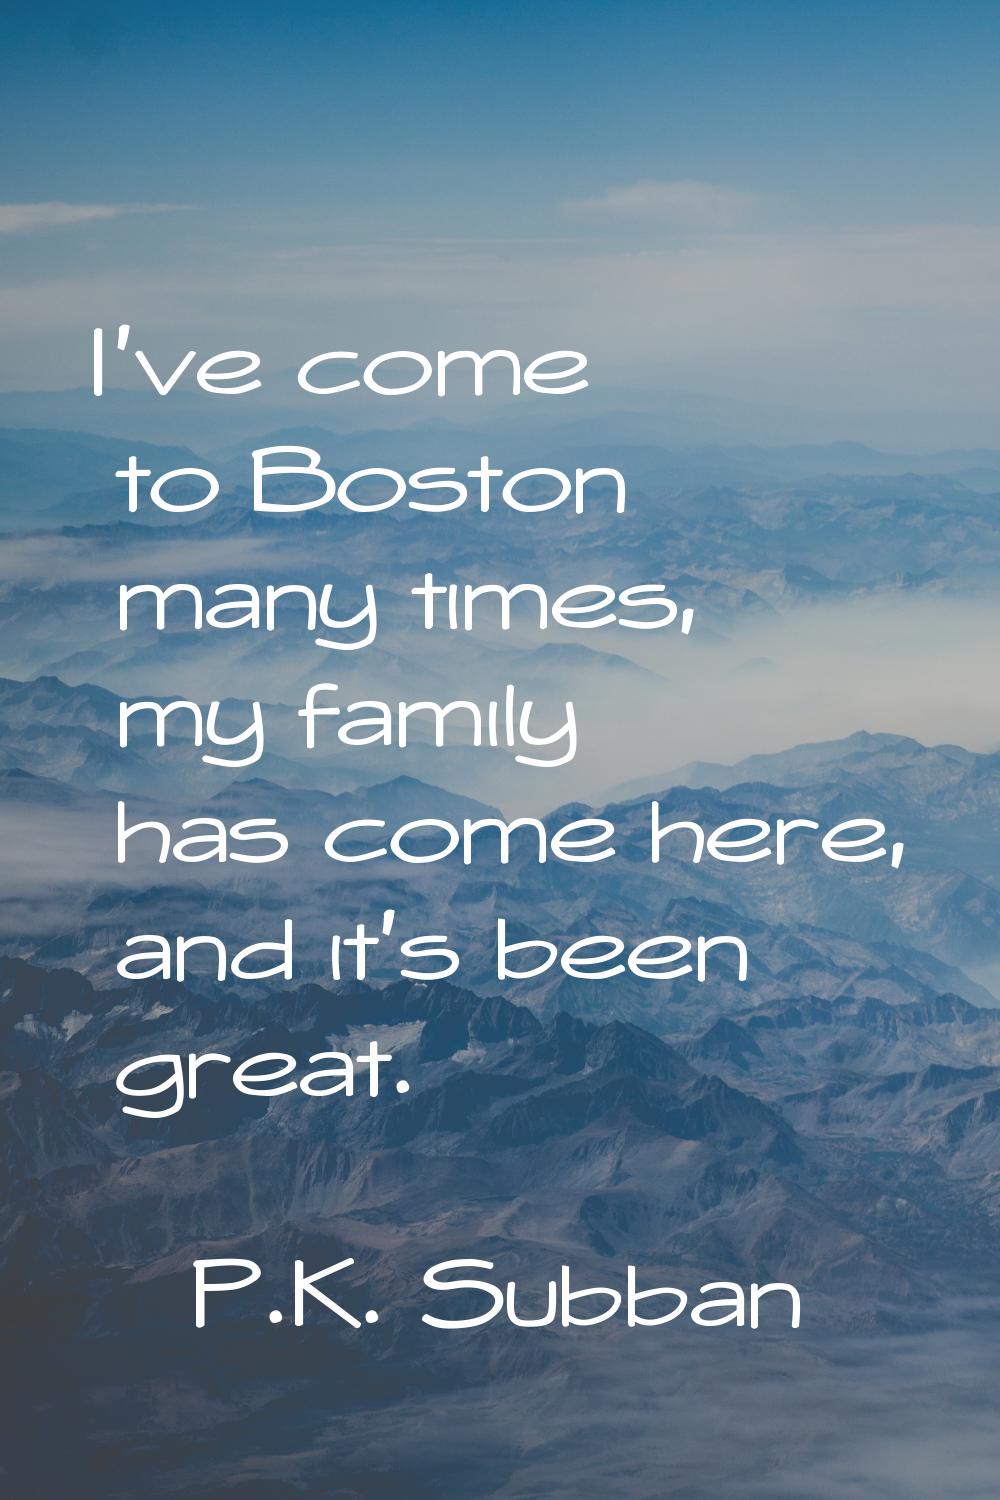 I've come to Boston many times, my family has come here, and it's been great.